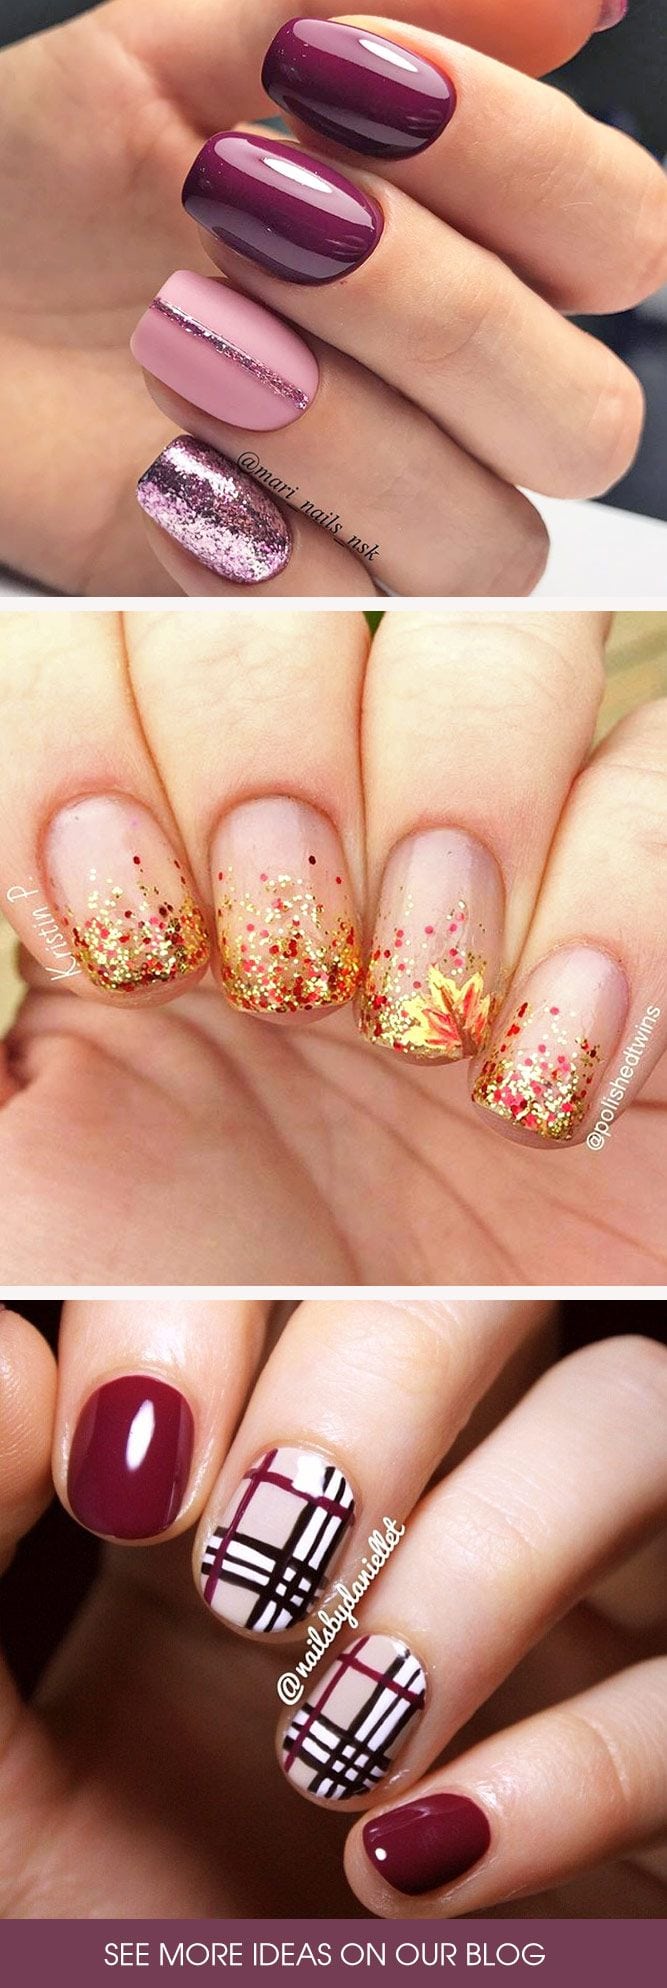 [ad_1]

The trendiest fall nail designs require some practice to look perfect. However, if you are patient, you can easily make your nails look amazing.
Source by kids555555
[ad_2]
			
			…